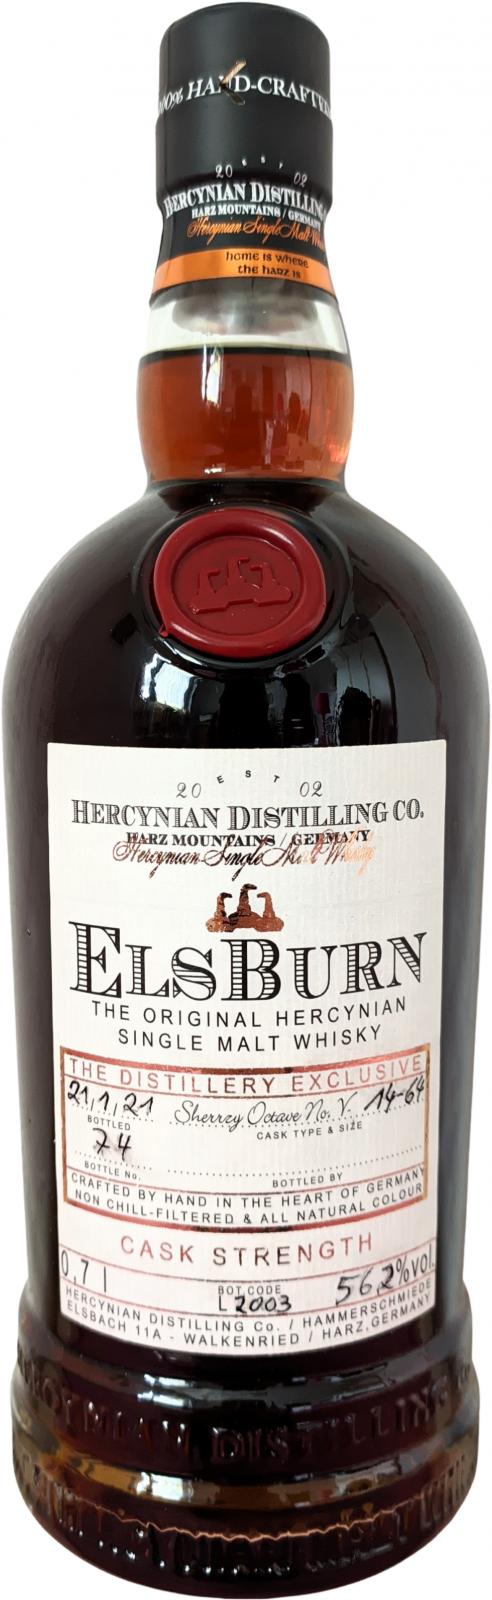 ElsBurn 2014 The Distillery Exclusive Single Sherry Octave V14-64 56.2% 700ml